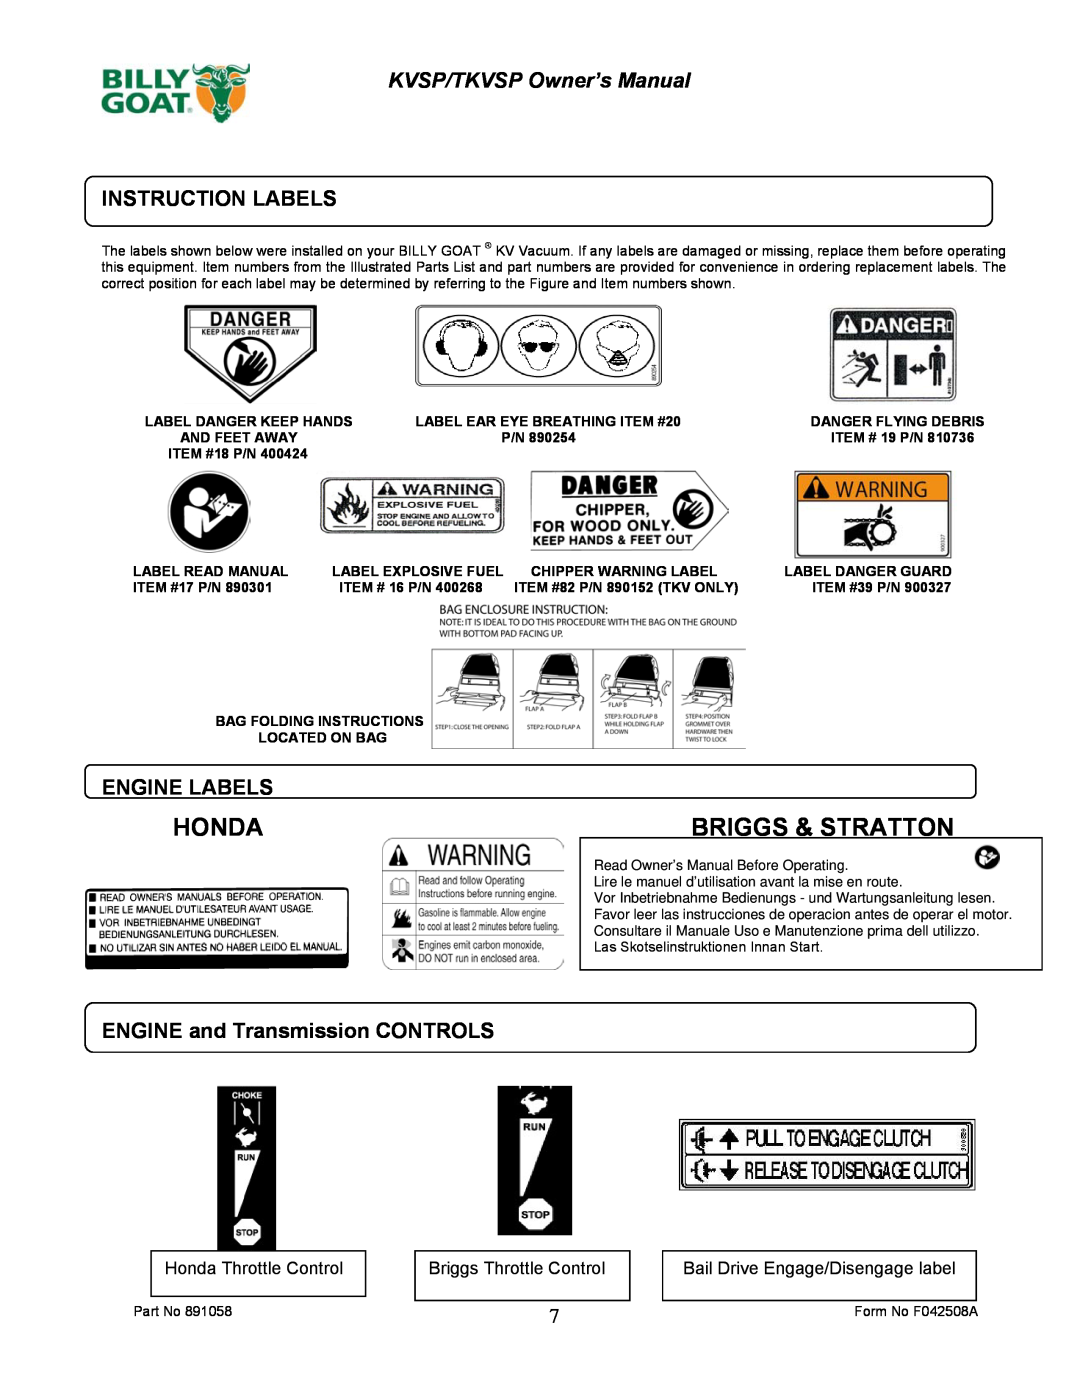 Billy Goat F042508A Honda, Briggs & Stratton, Instruction Labels, Engine Labels, ENGINE and Transmission CONTROLS 